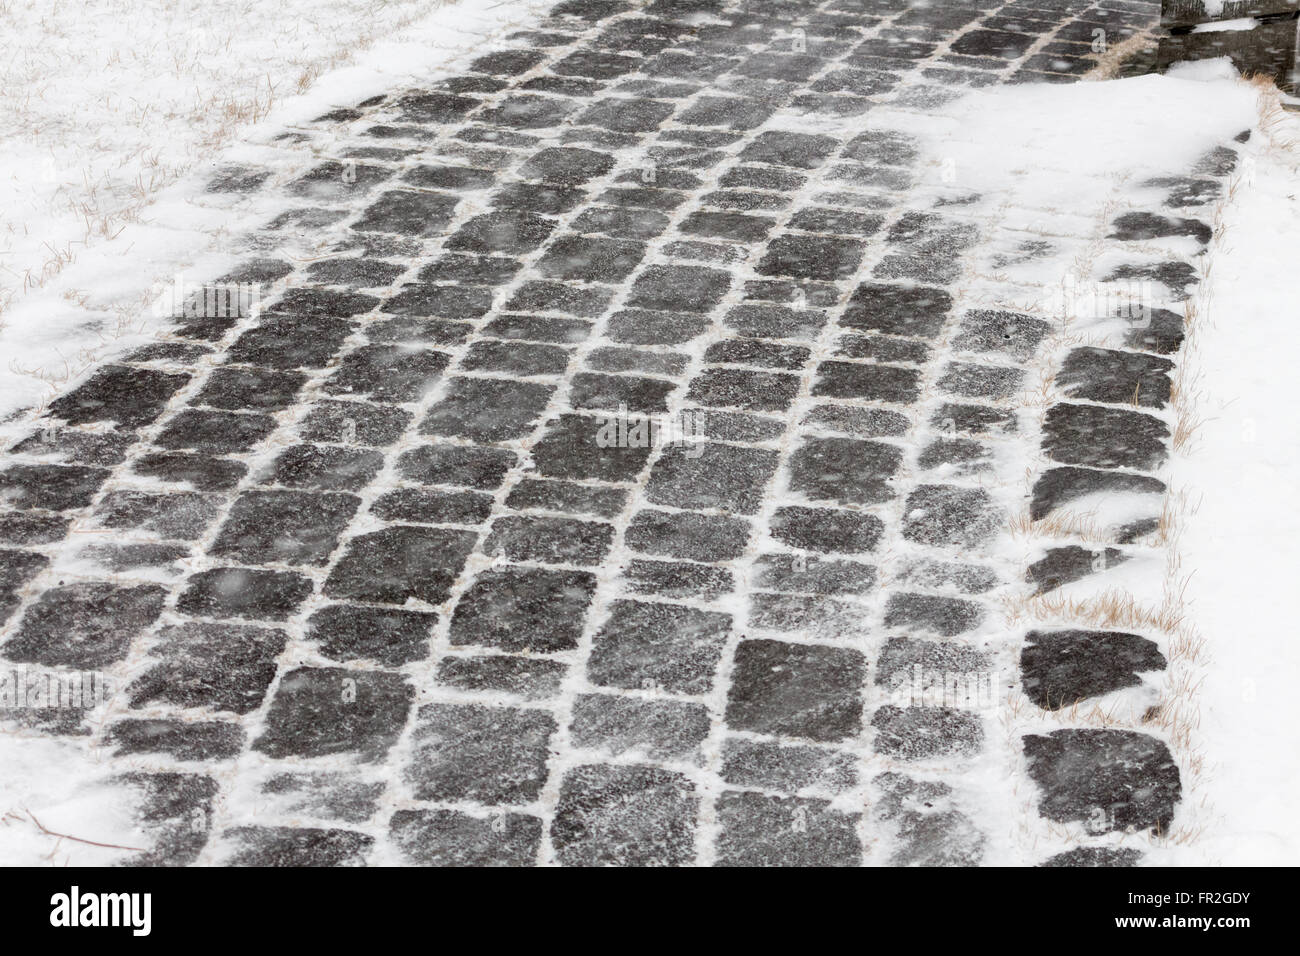 cobble stone covered in snow Stock Photo